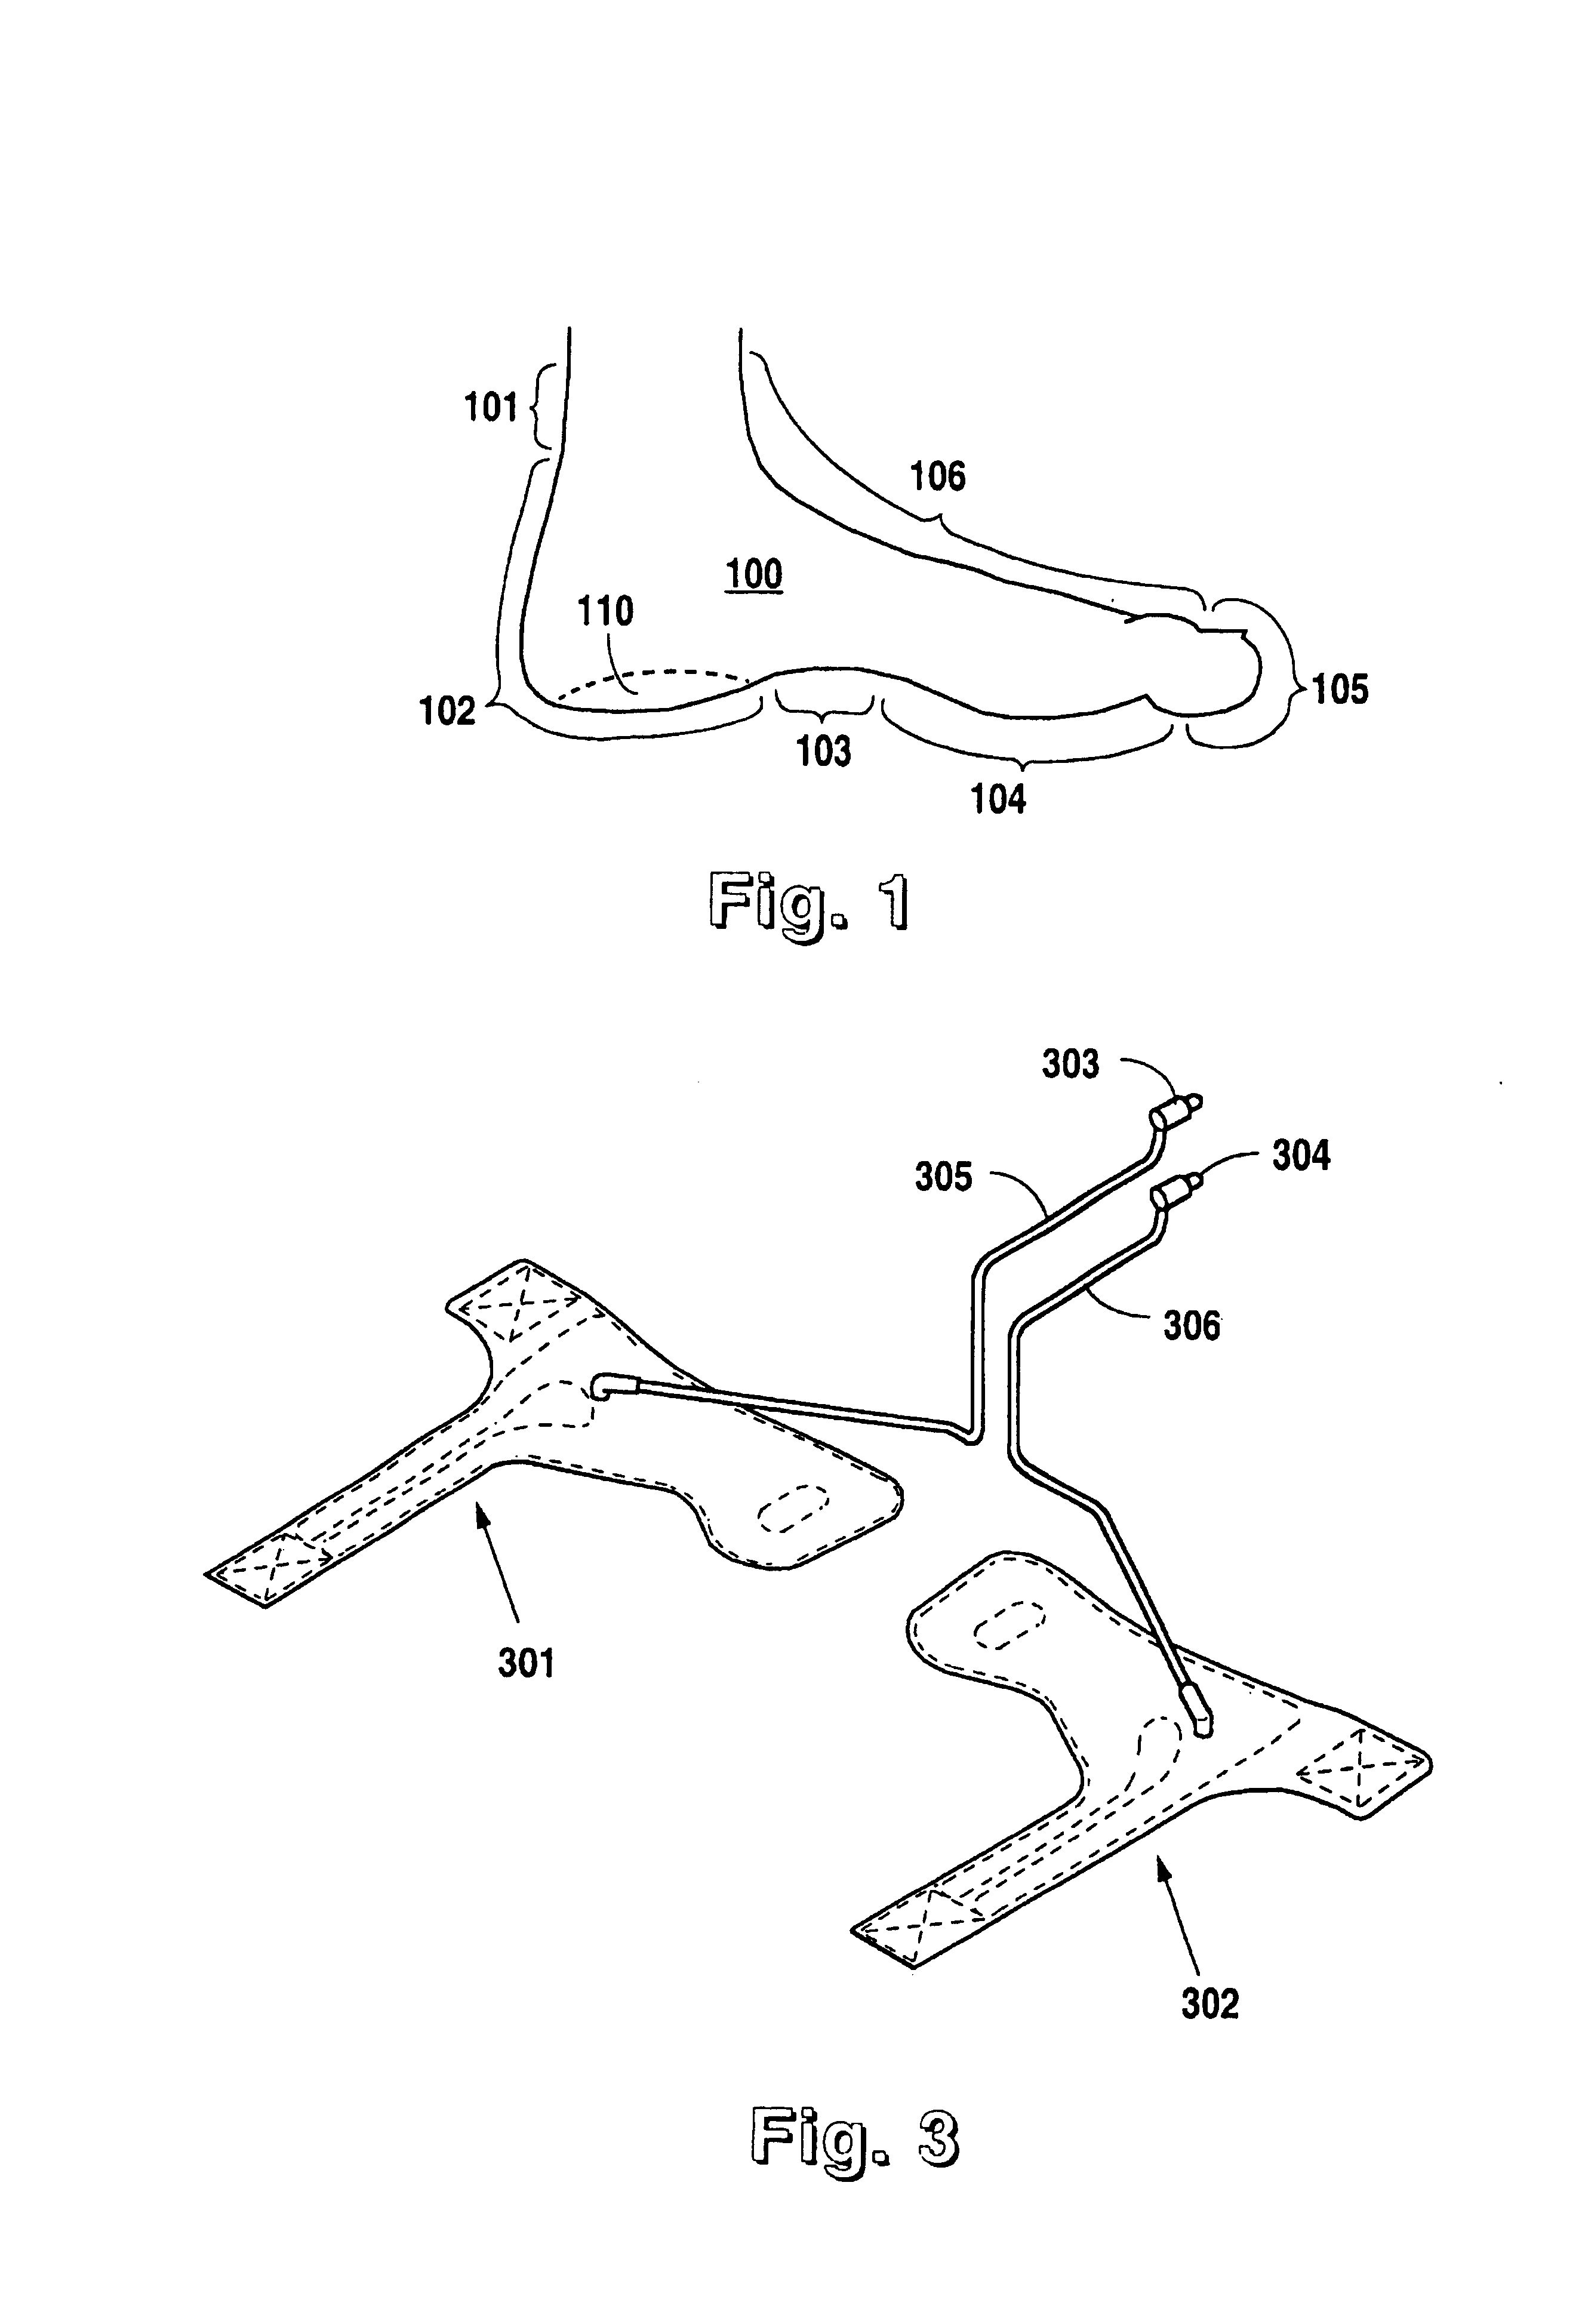 Therapeutic apparatus for treating ulcers